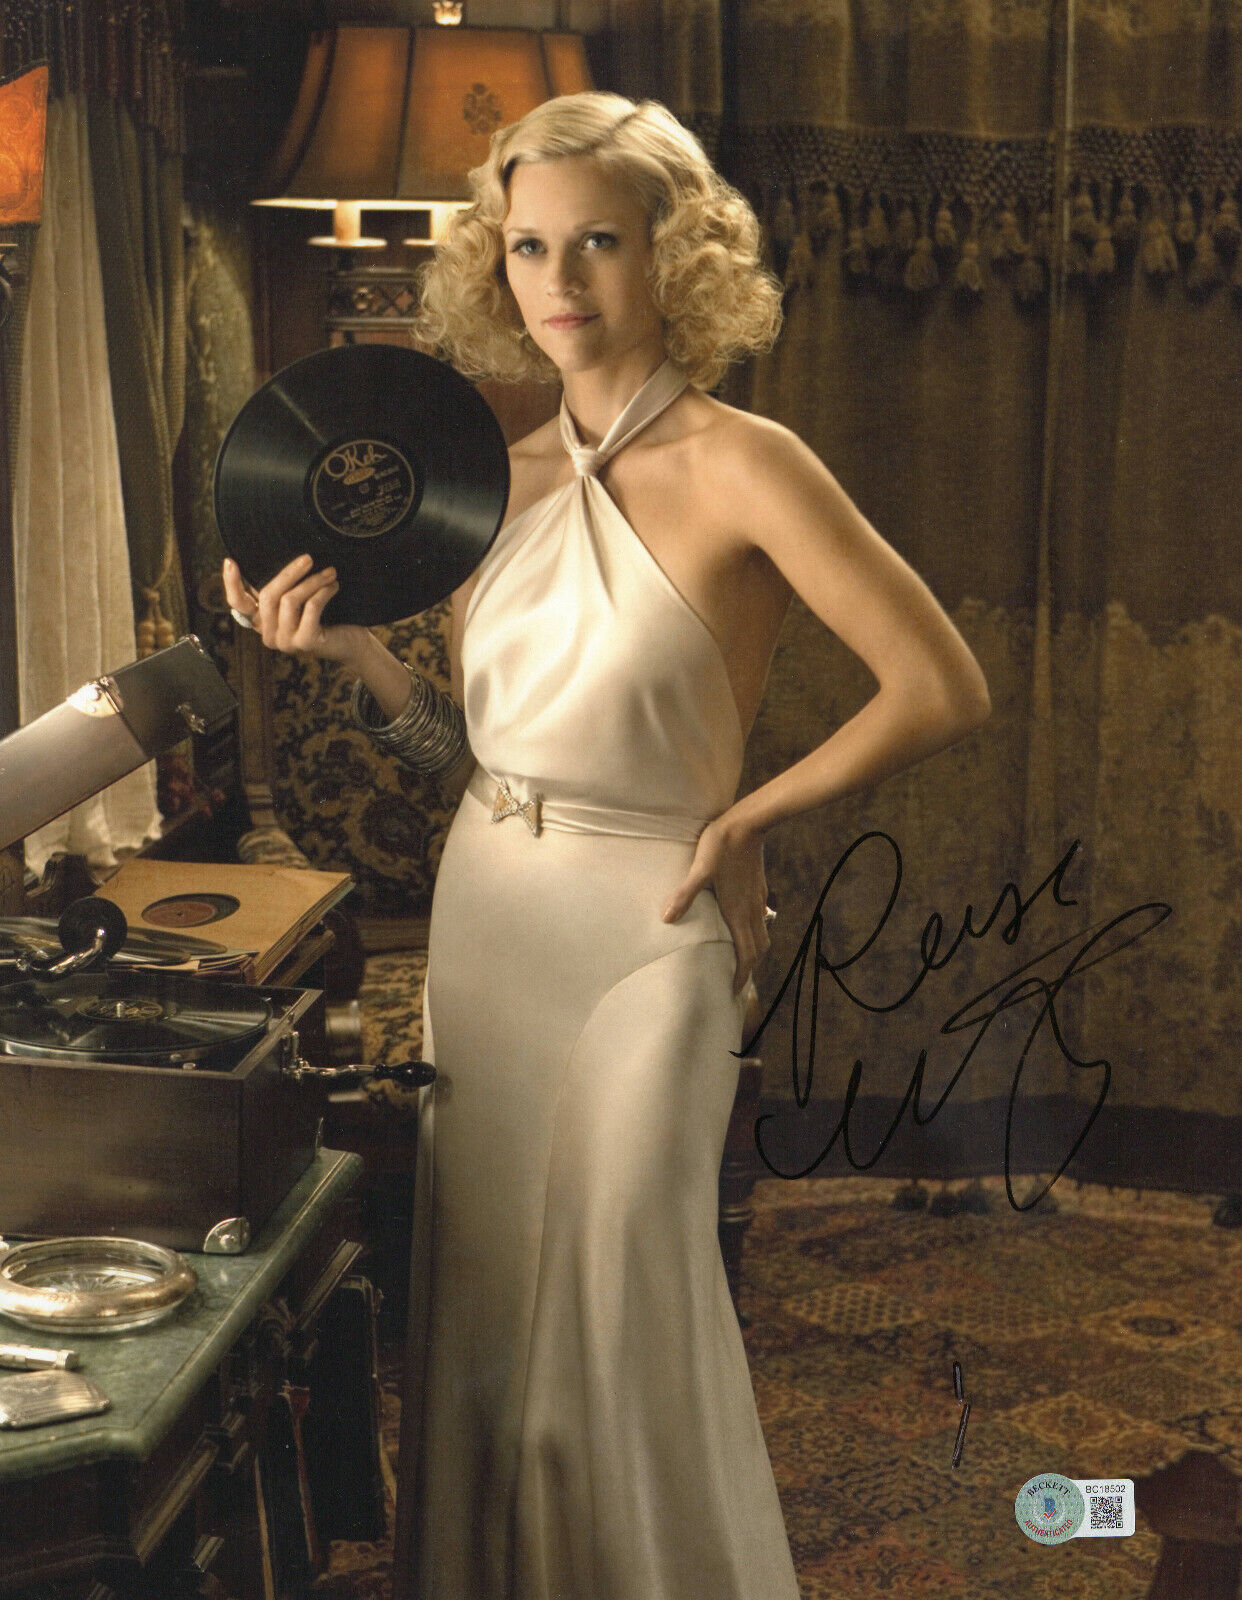 REESE WITHERSPOON SIGNED WATER FOR ELEPHANTS 11x14 PHOTO AUTOGRAPH BECKETT BAS